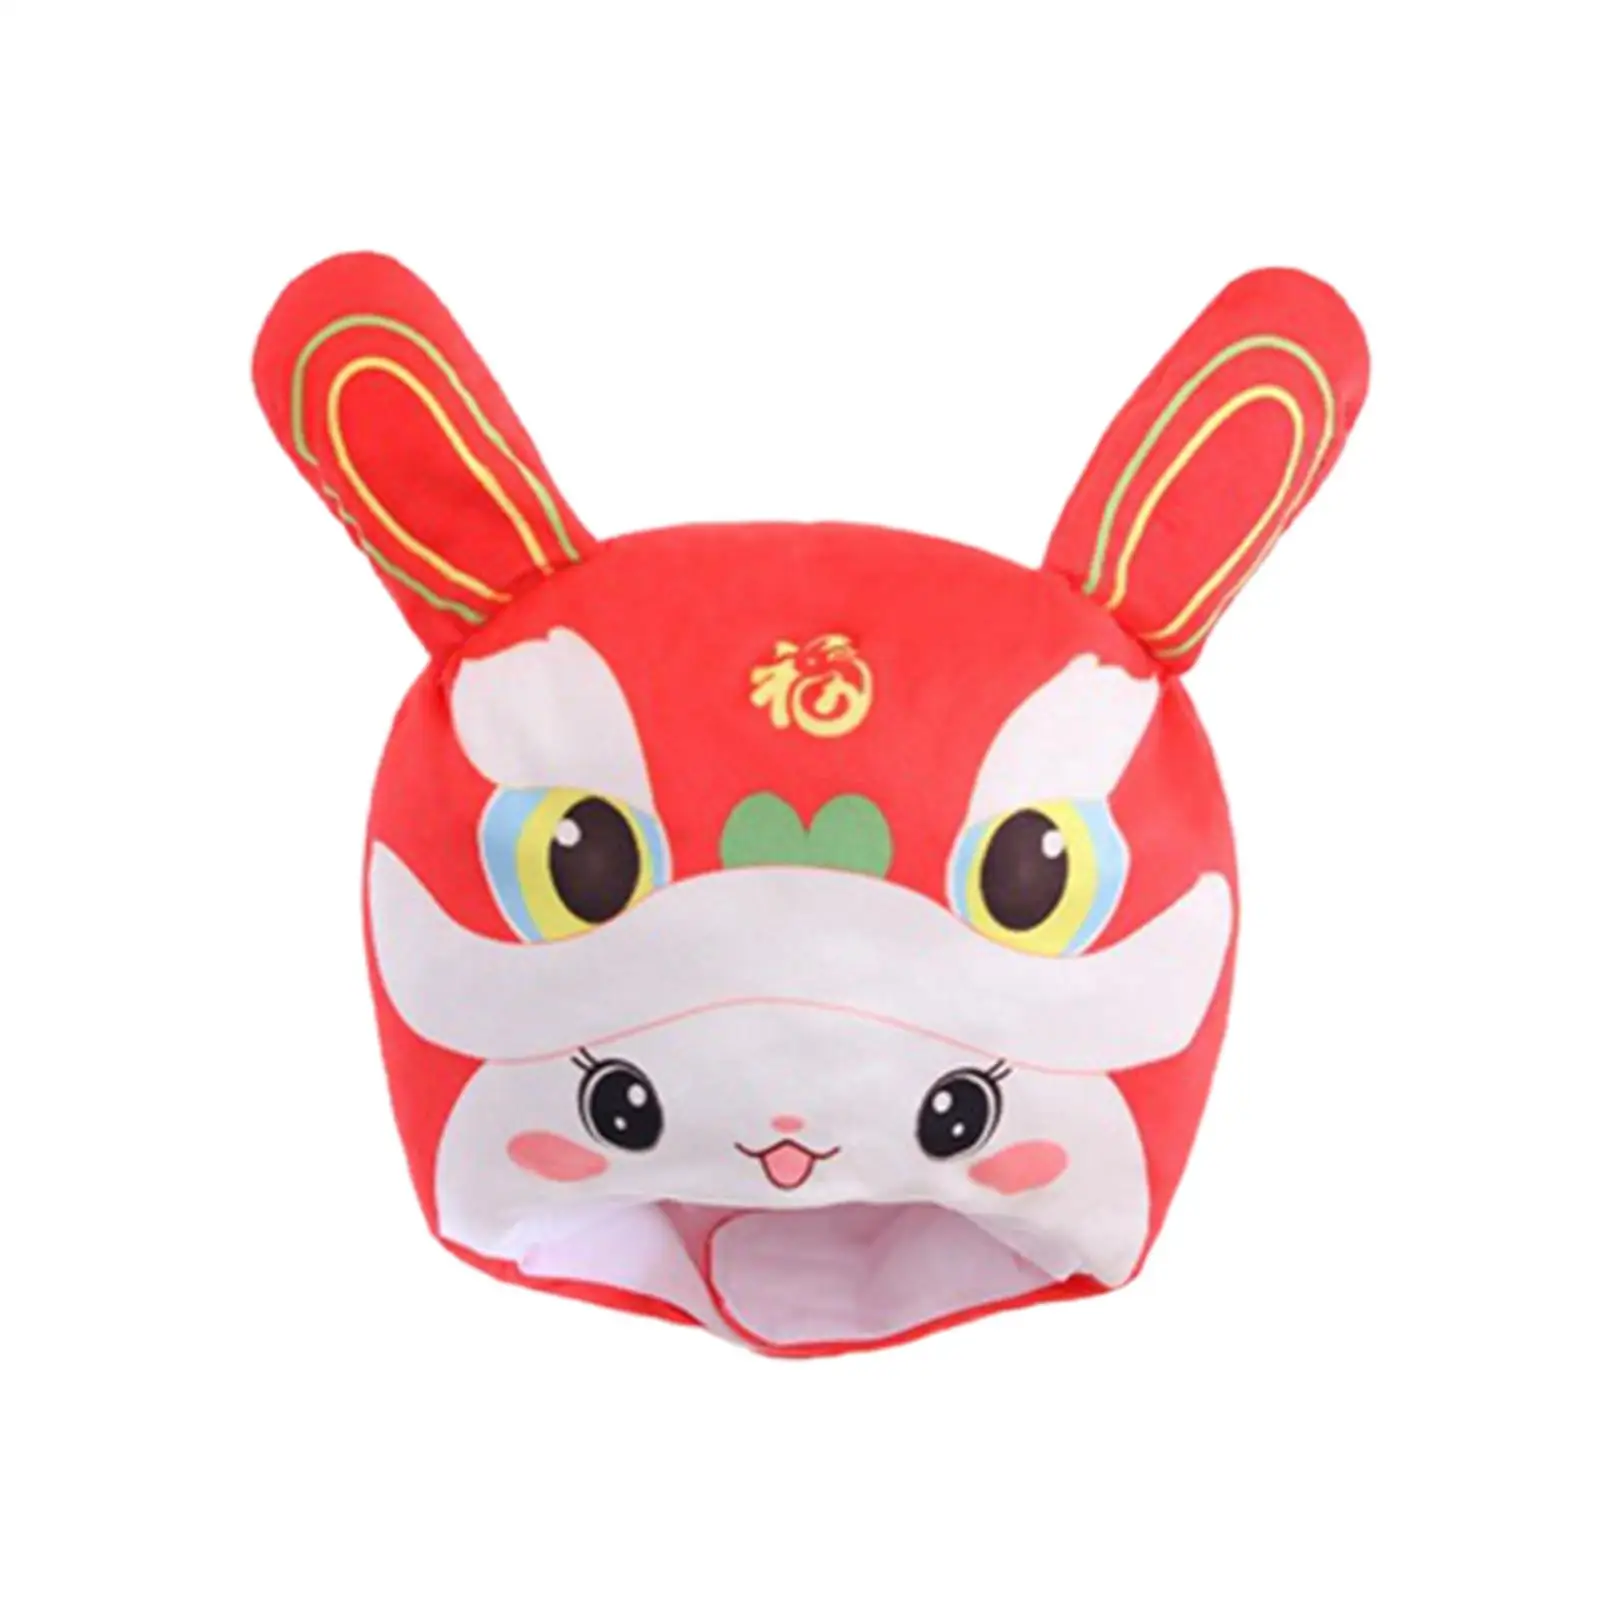 Lion Rabbit Plush Hat Gift Photo Prop Adult Kids Animal Hat Creative Headwear Comfortable Warm for Party Dress Cosplay